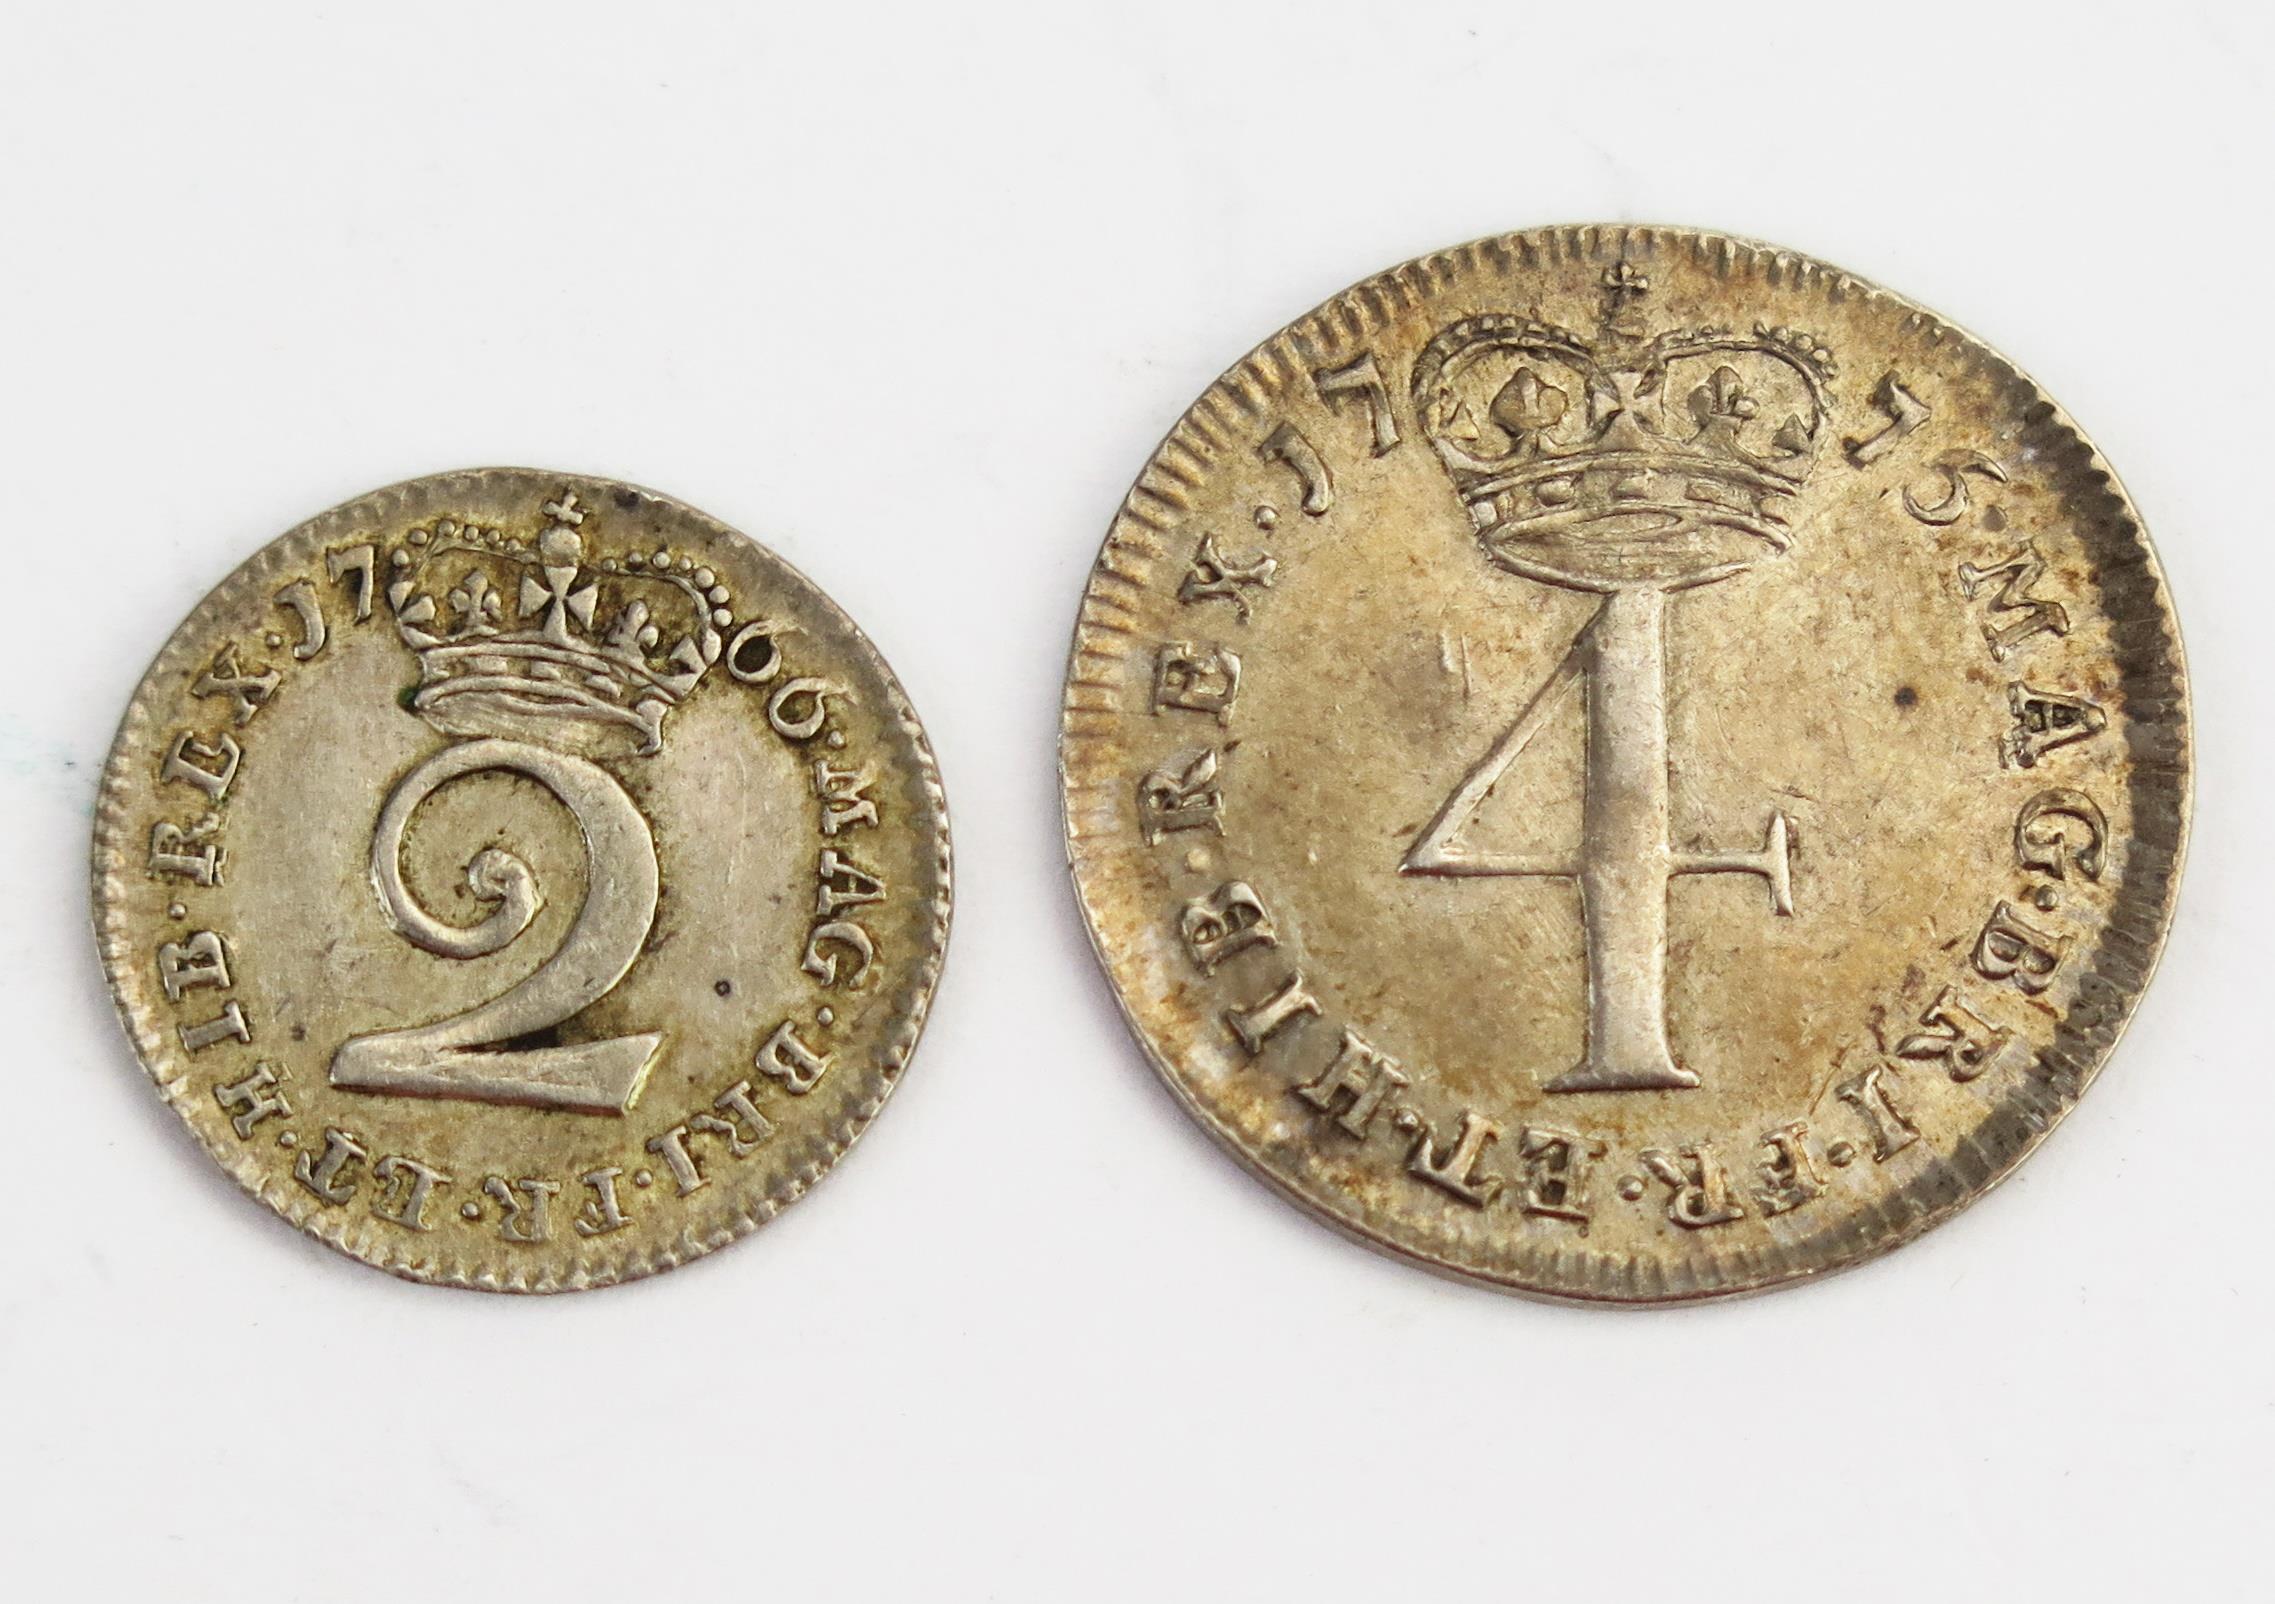 George III 1766 twopence and 1776 fourpence. - Image 2 of 3